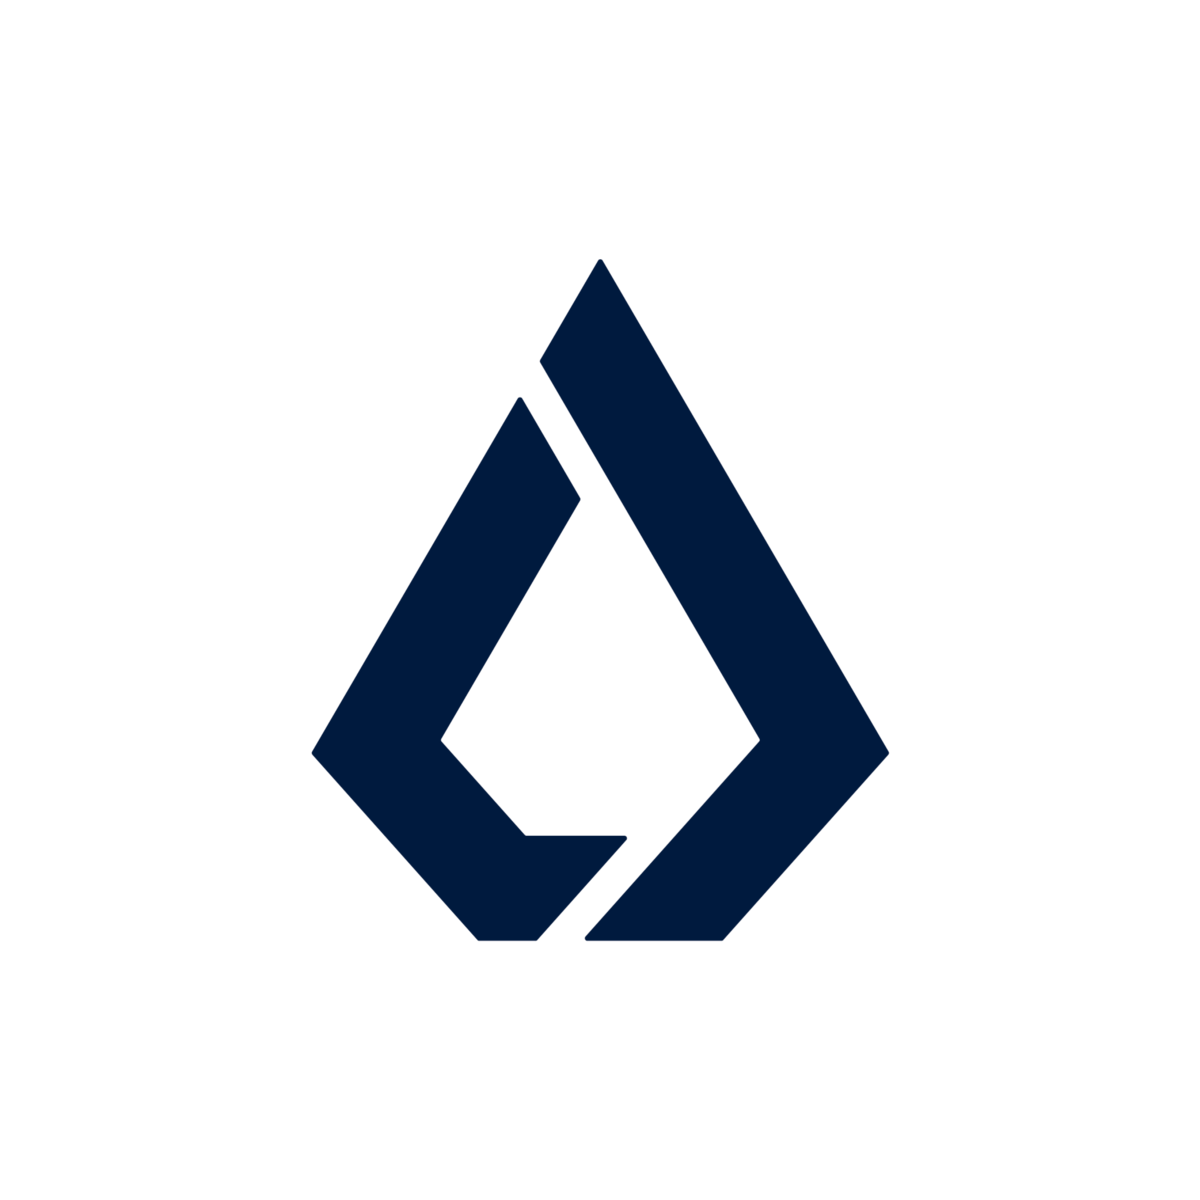 Rebranding Blockchain Cryptocurrency Lisk Others Logo Clipart